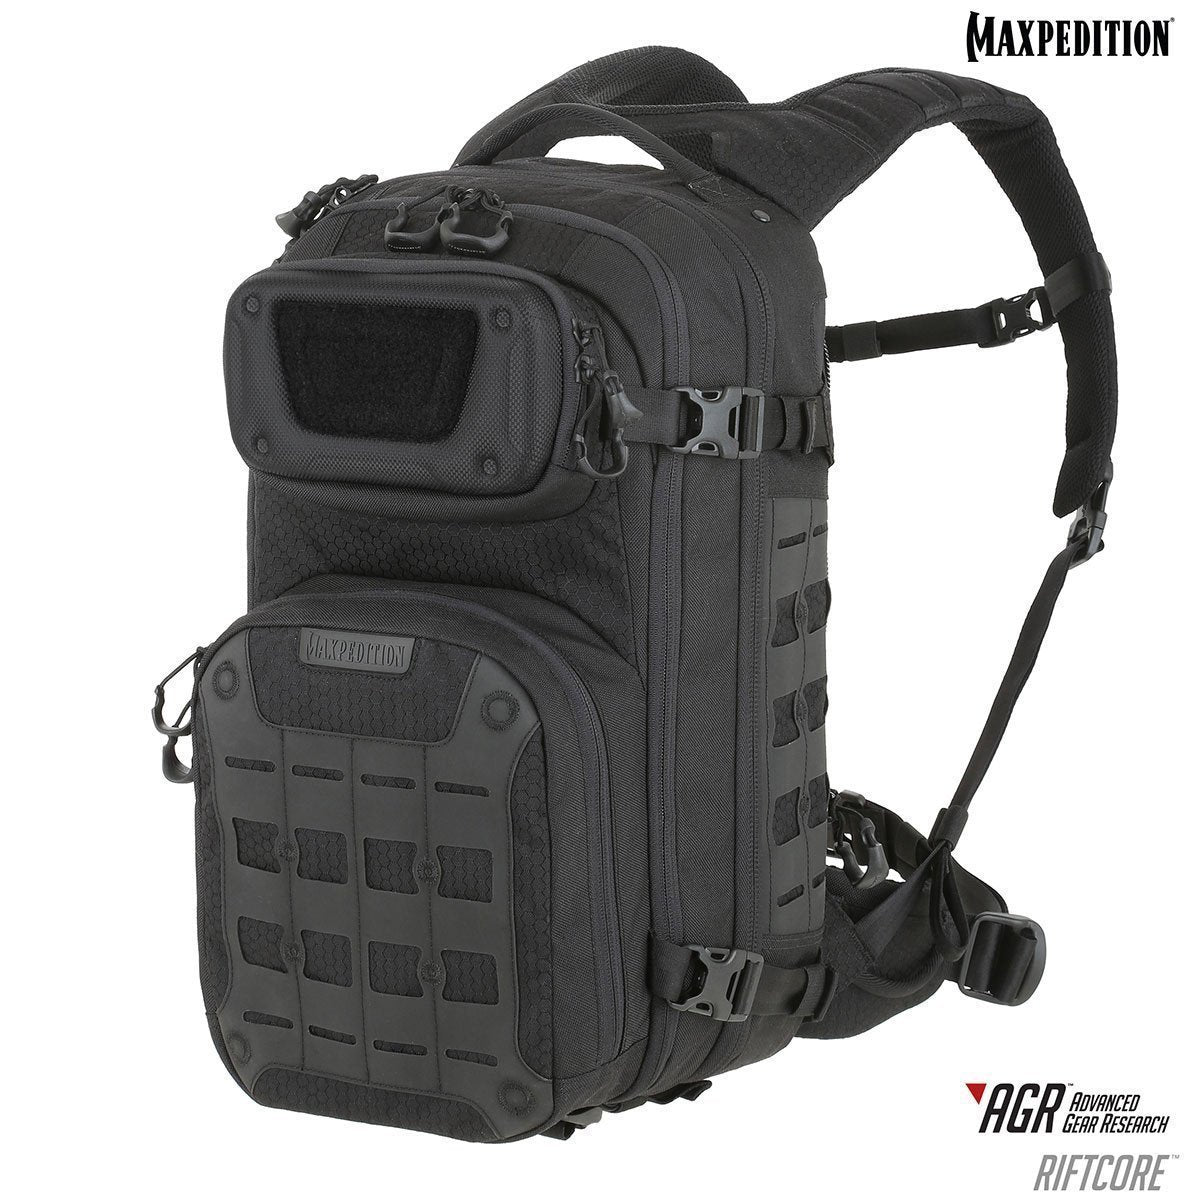 Riftcore™ Backpack | Maxpedition Tactical Gear